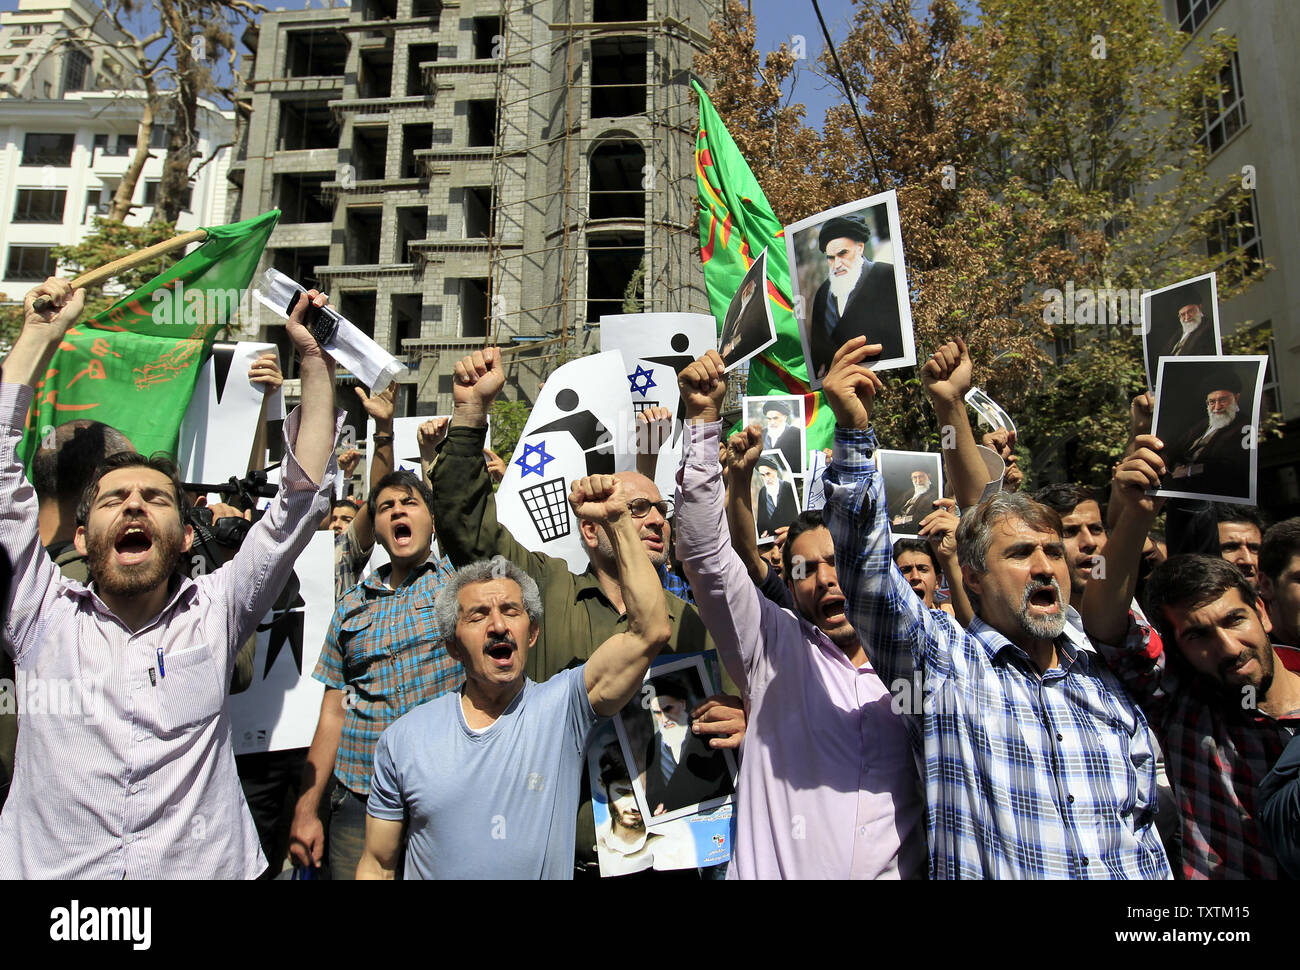 Iranian demonstrators chant anti-American slogans during a demonstration against the anti-Islam movie made in the US in front of the Swiss Embassy in Tehran, Iran on September 13, The Swiss Embassy